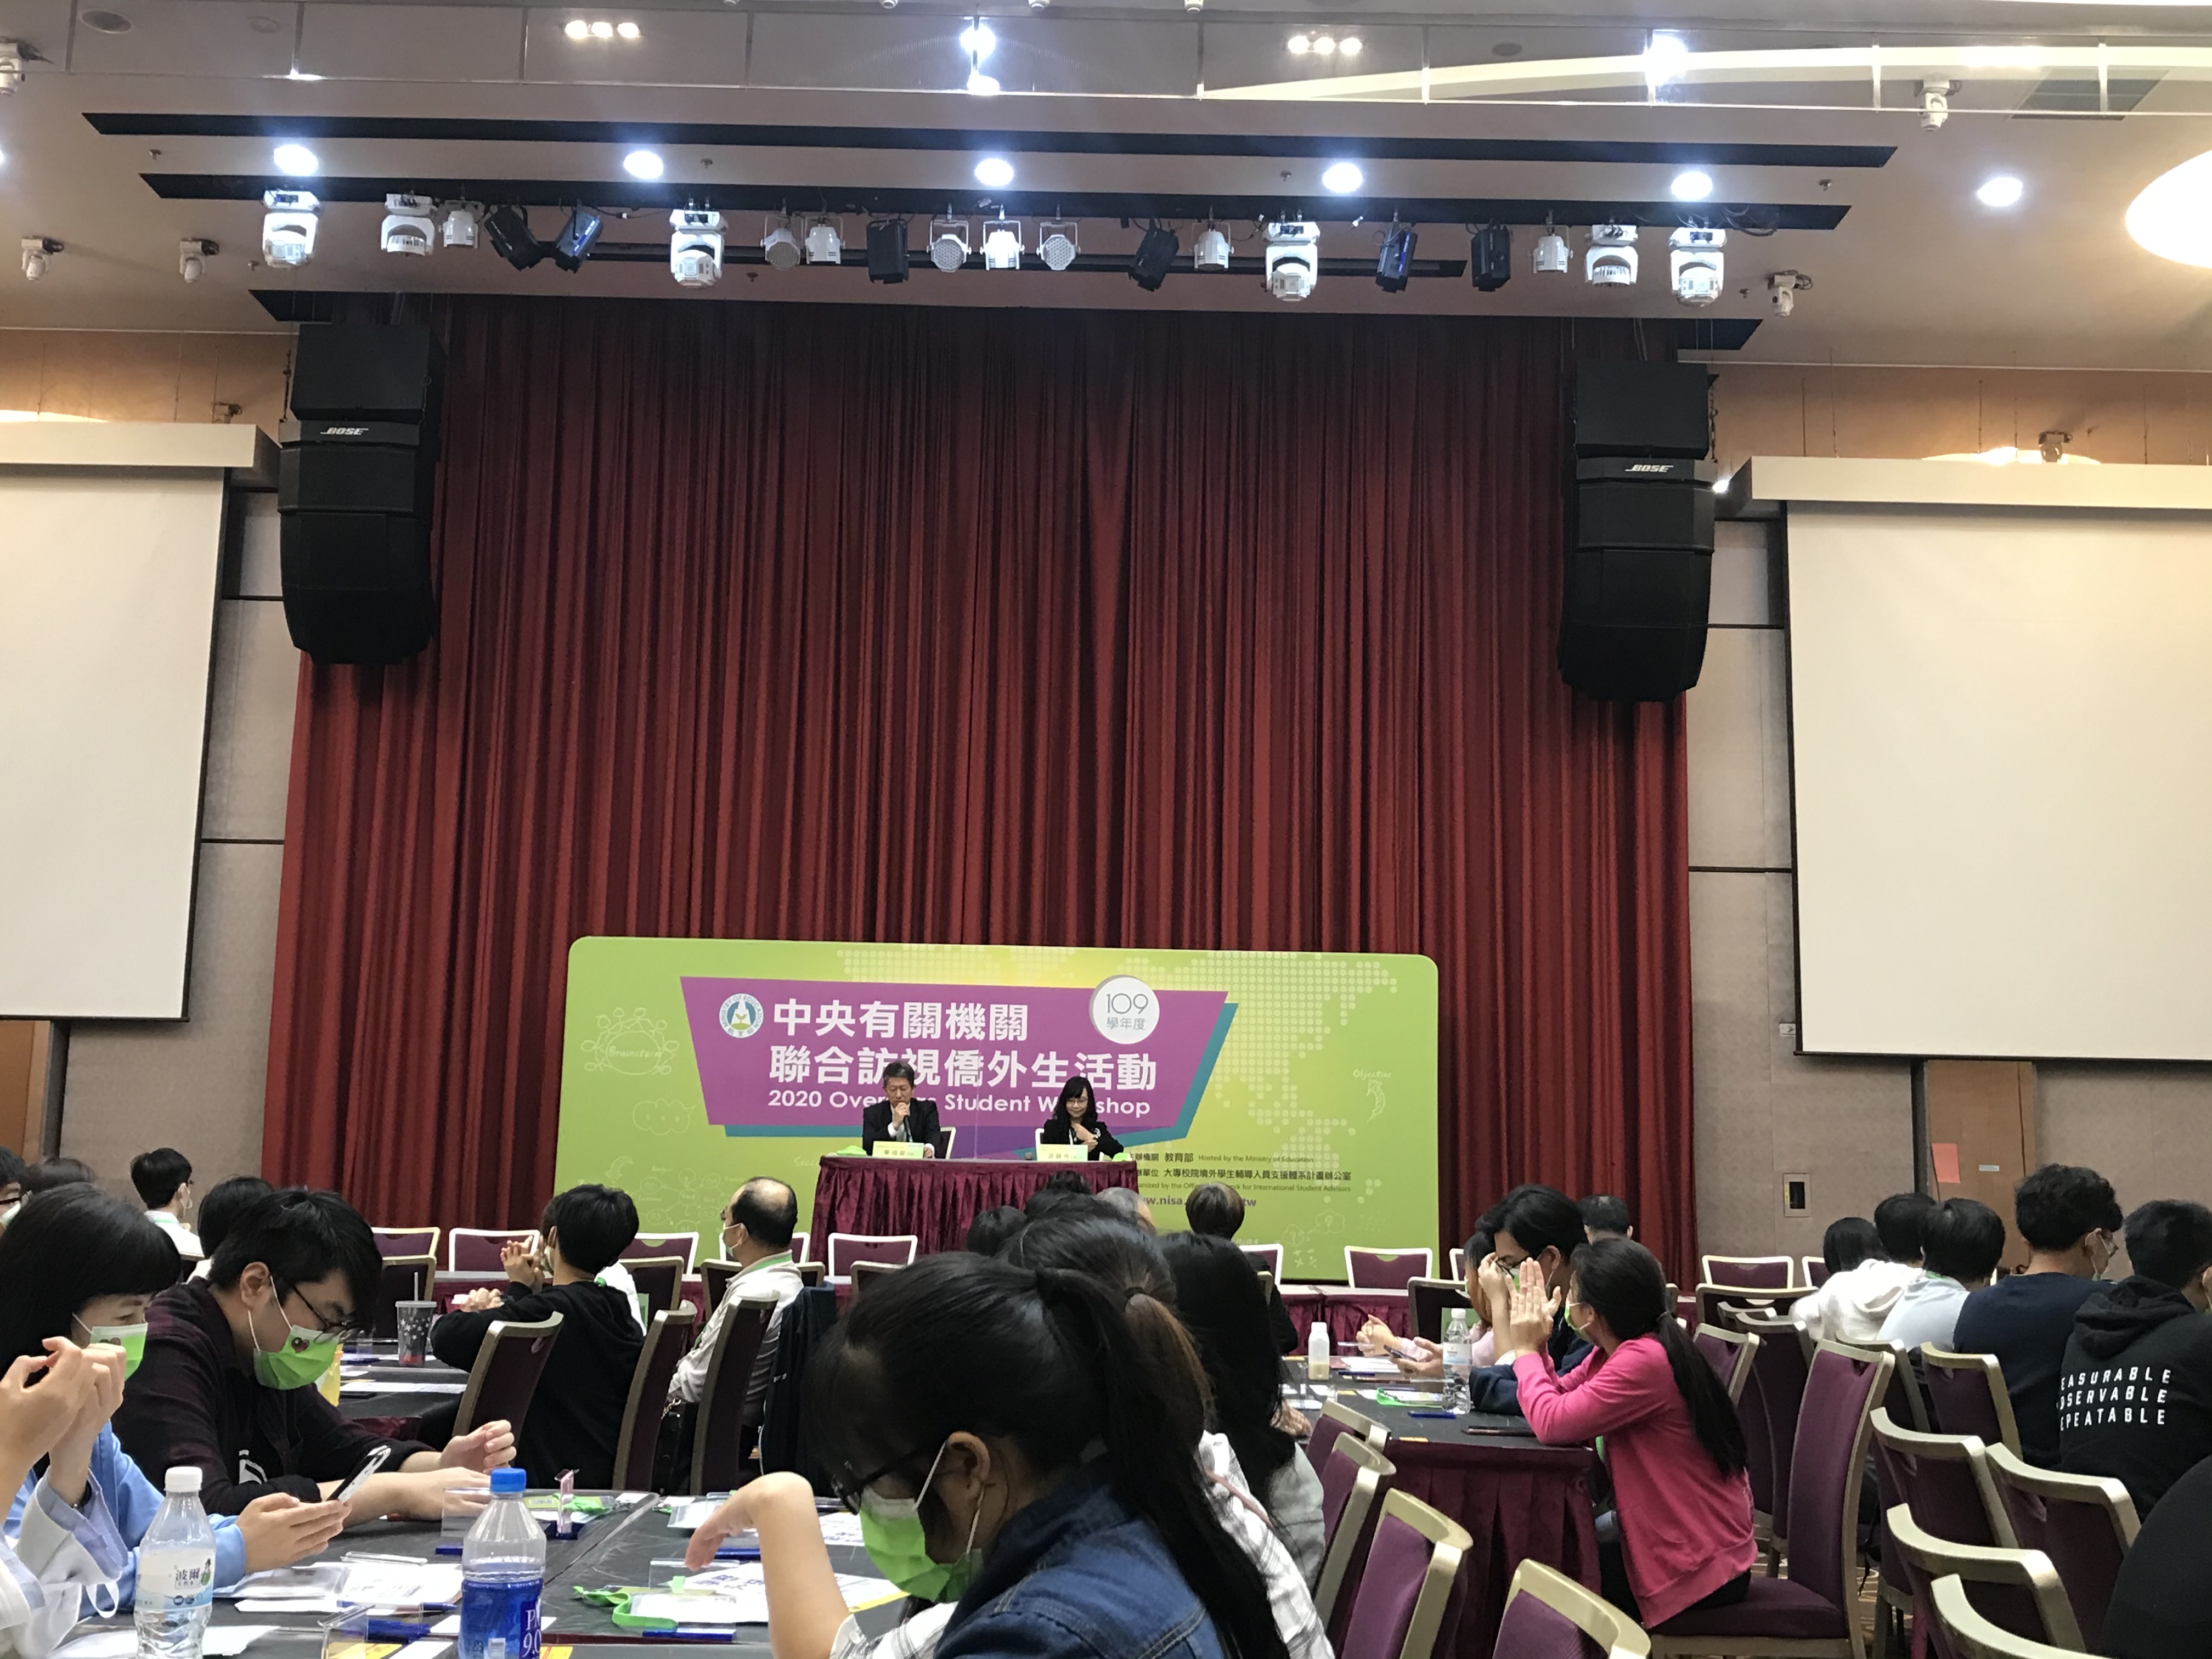 2020 Relevant Central Administrations Invited Foreign Students in Northern Taiwan to the Meeting(Open new window)